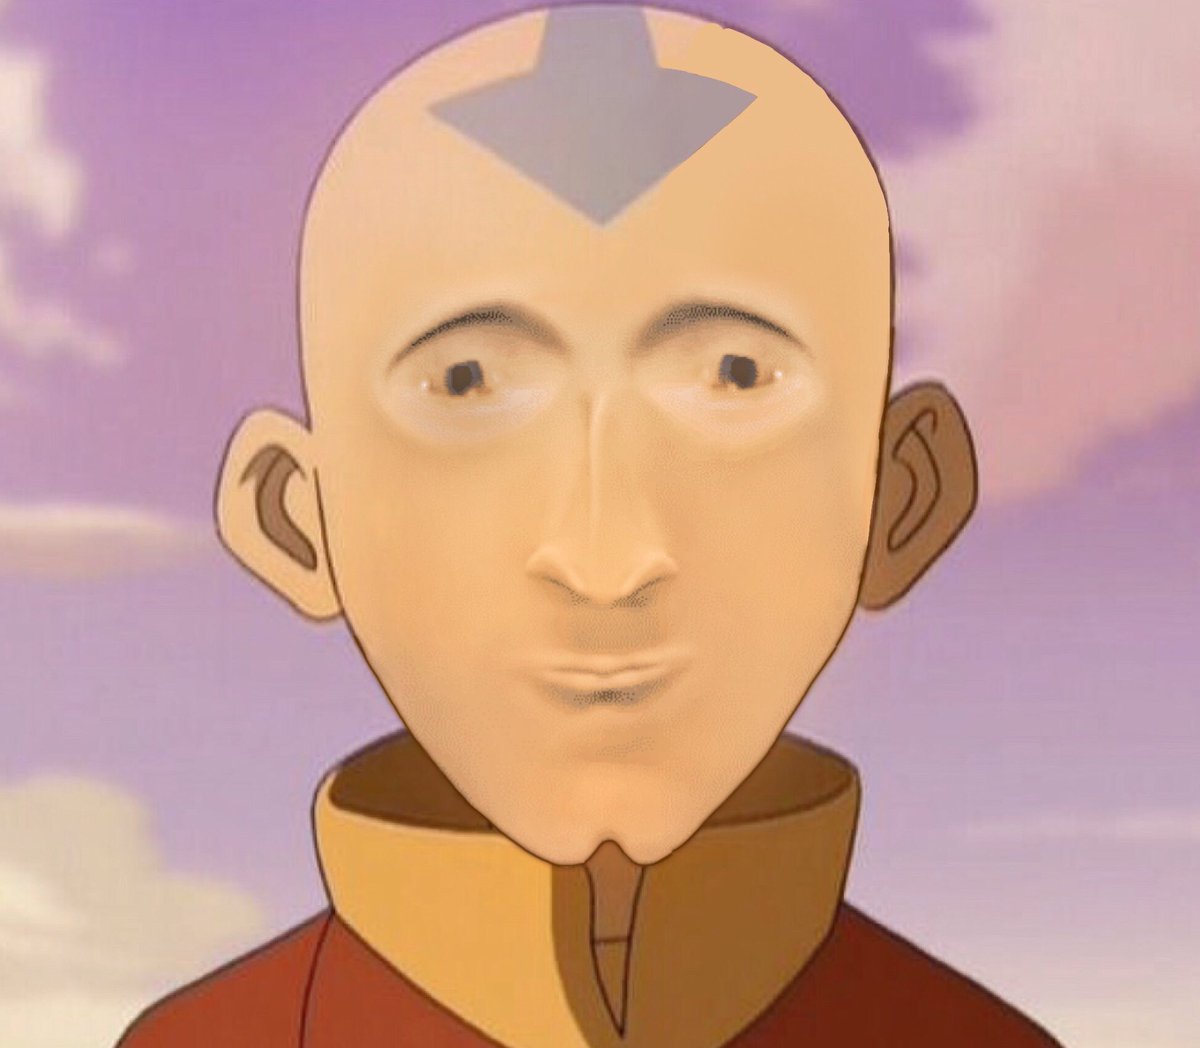 Thread by @vacationtenzin, aang as other bald people / characters: a thread  caiaang meme [...]